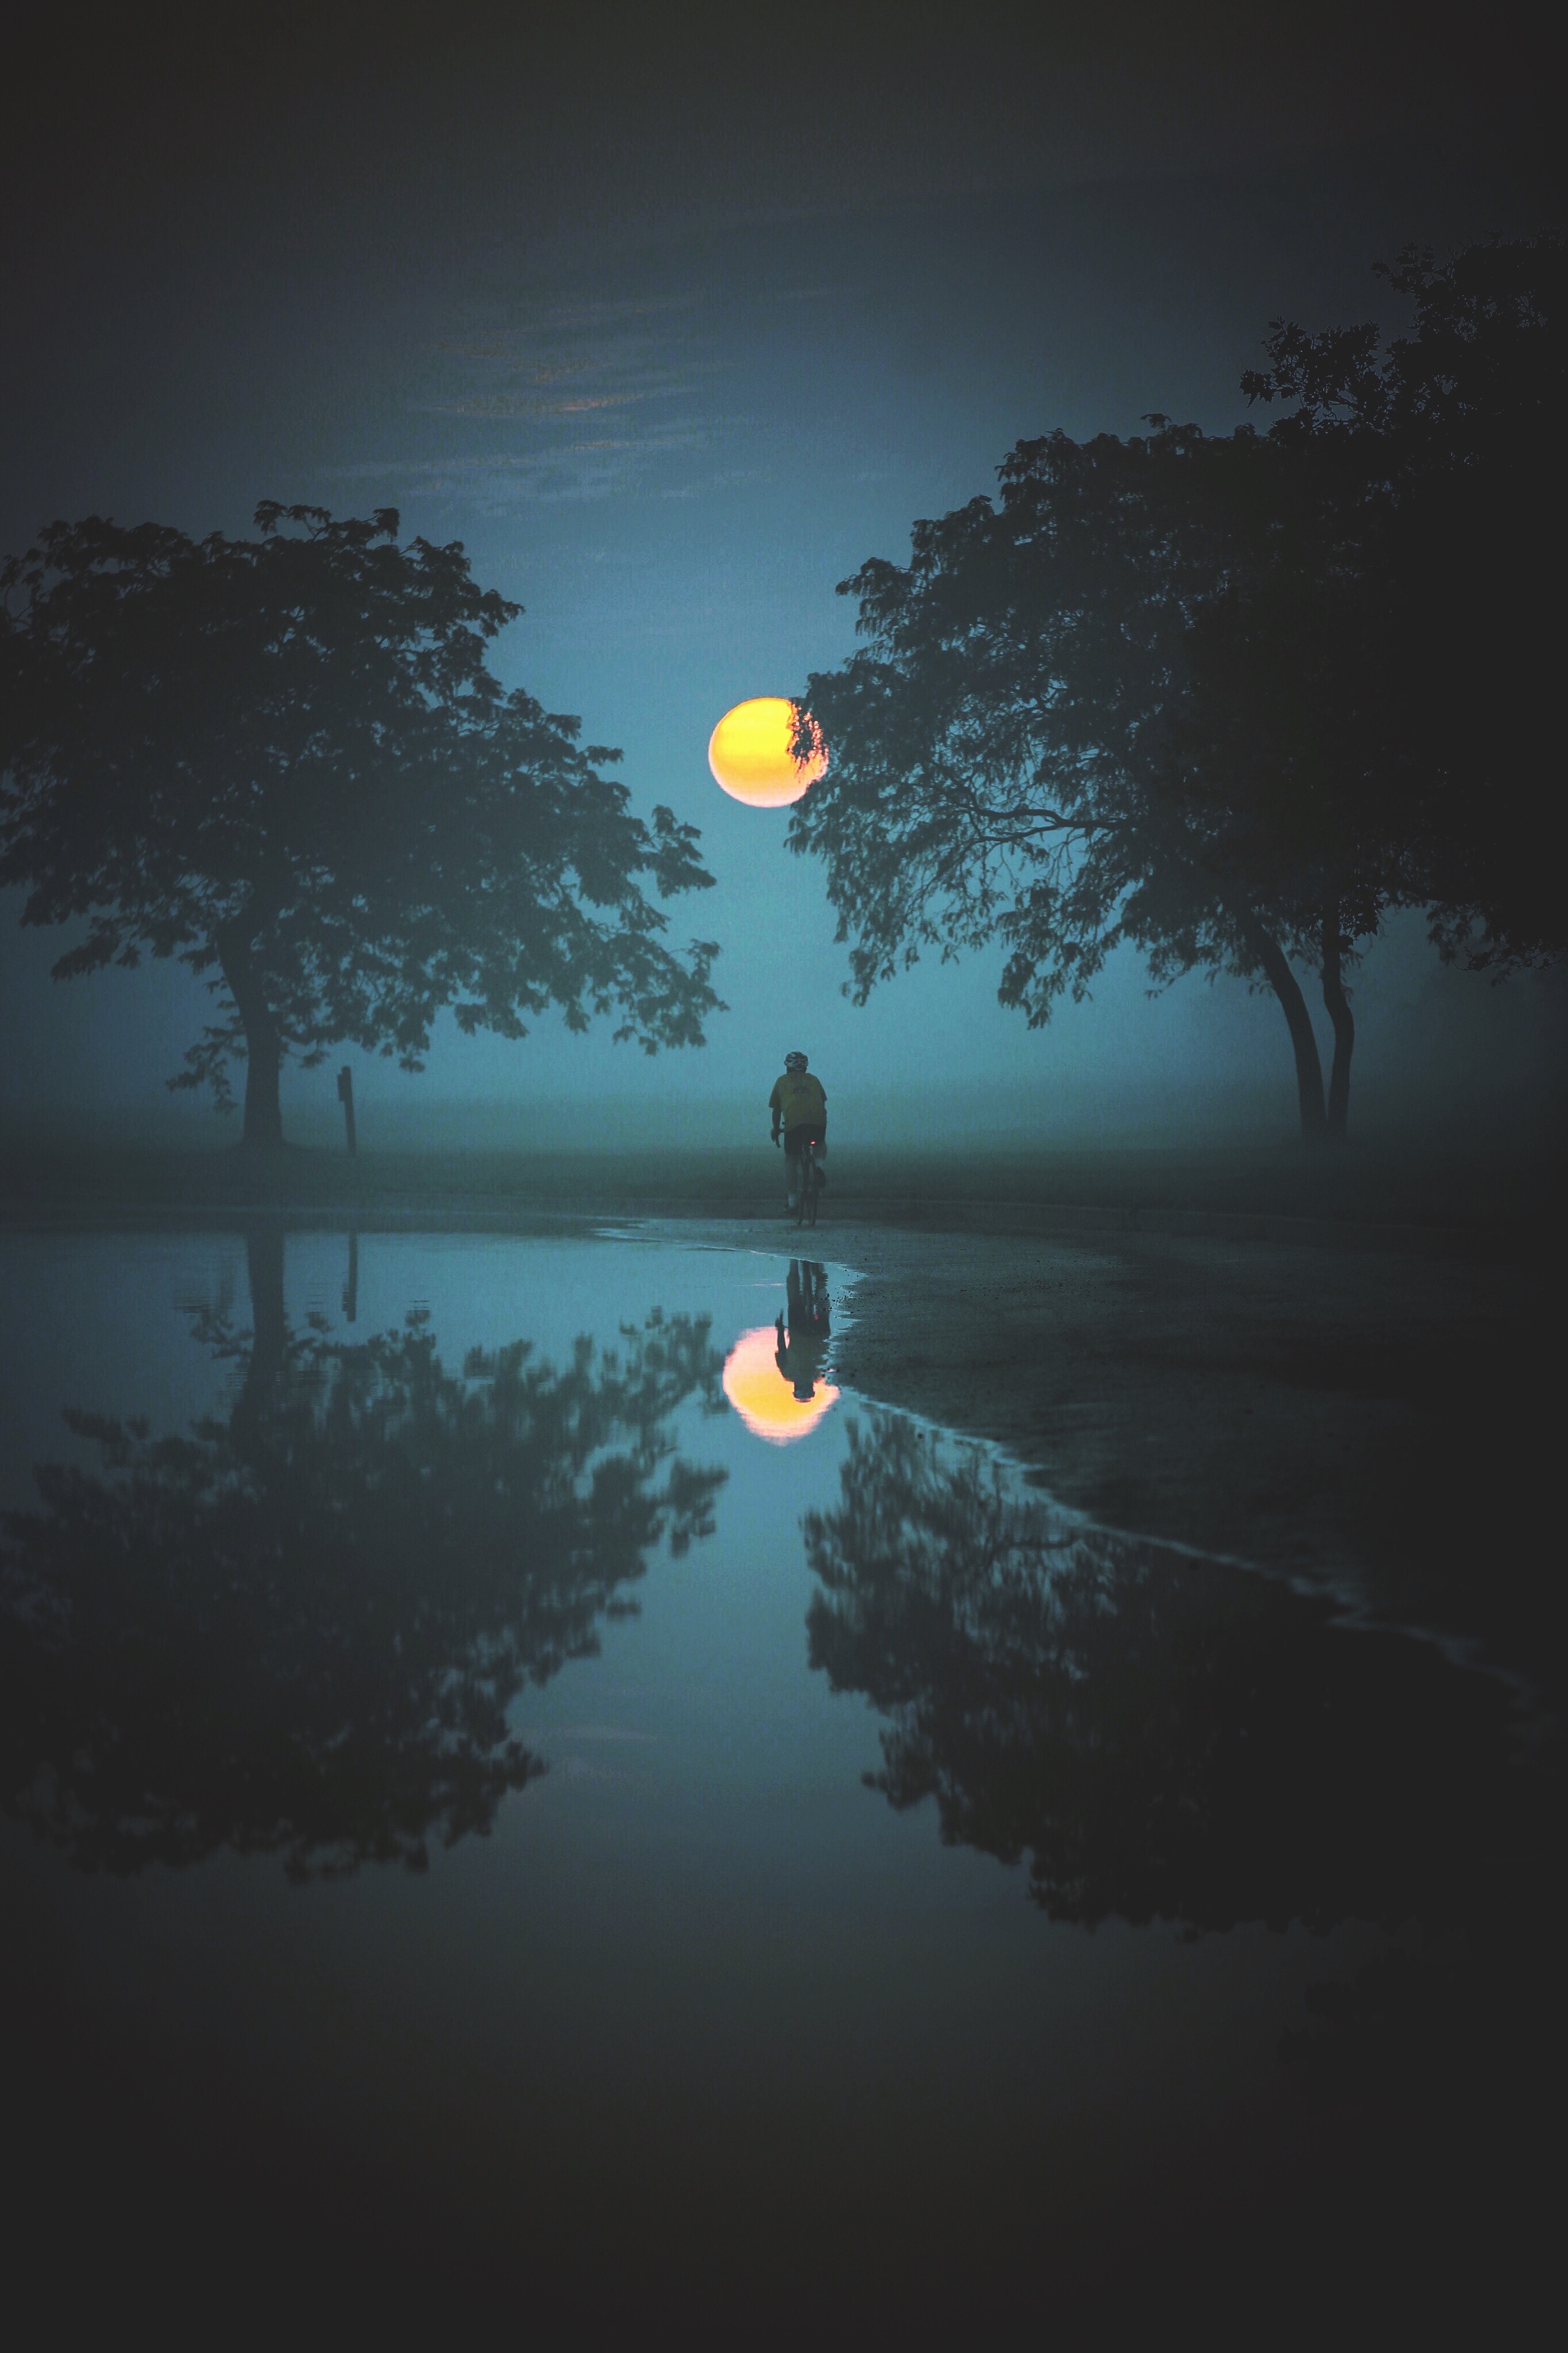 reflection, cyclist, moon, nature, water, trees, fog 1080p